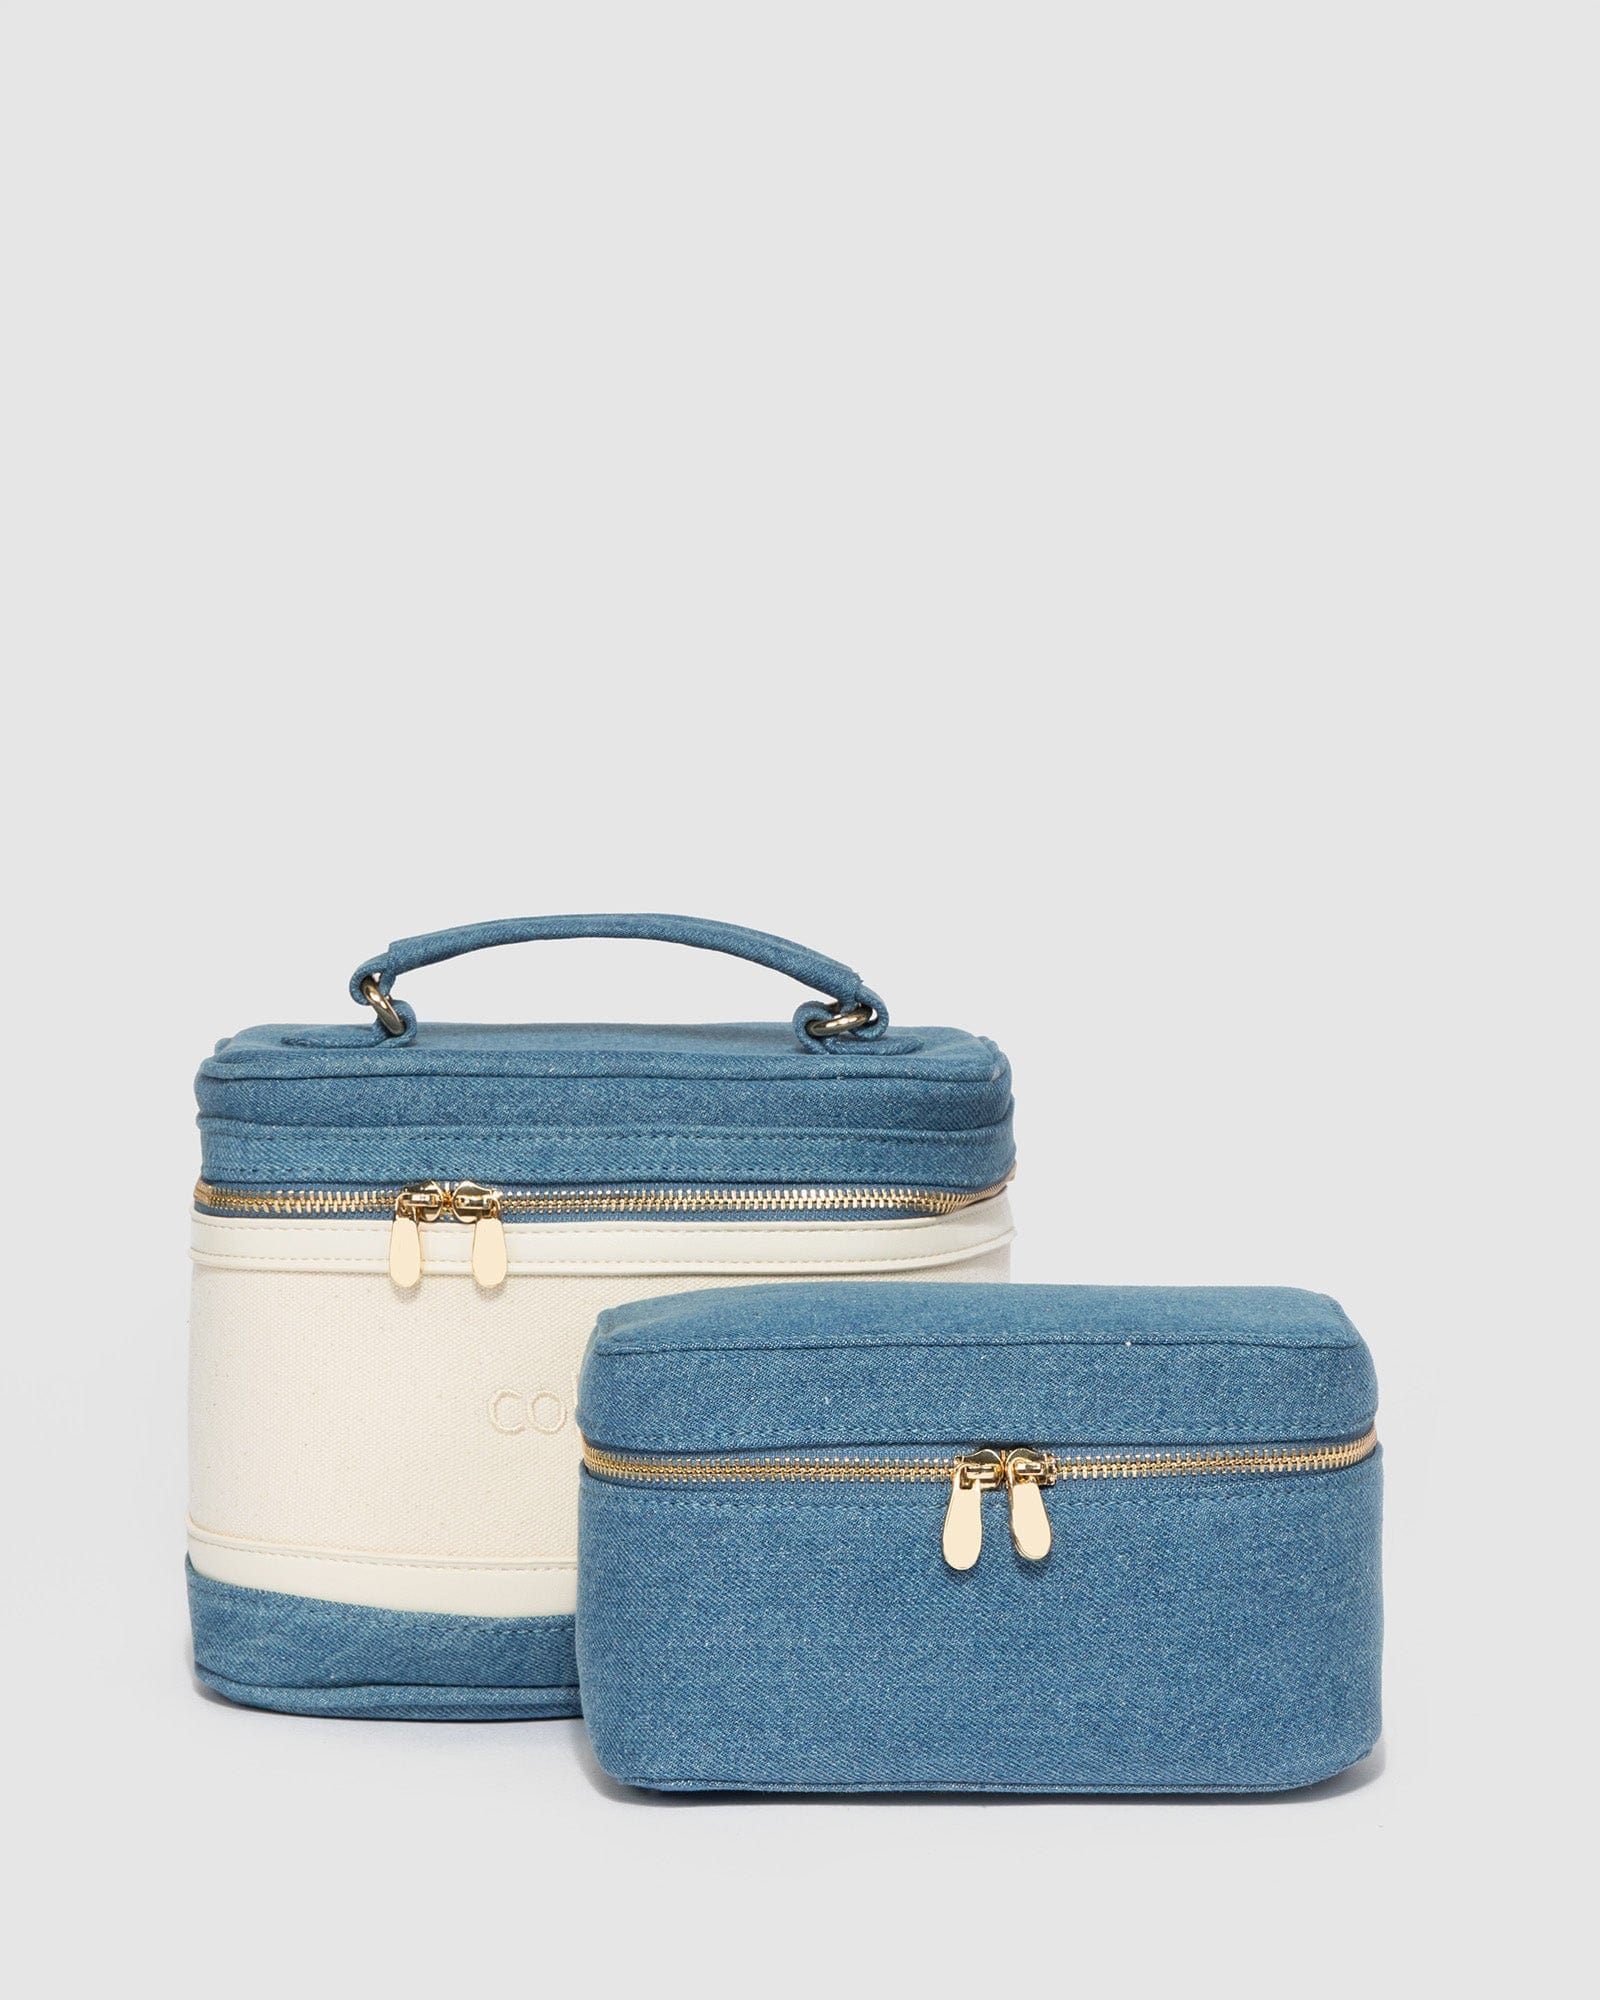 Bags you'll Tote-ally love for... - colette by colette hayman | Facebook